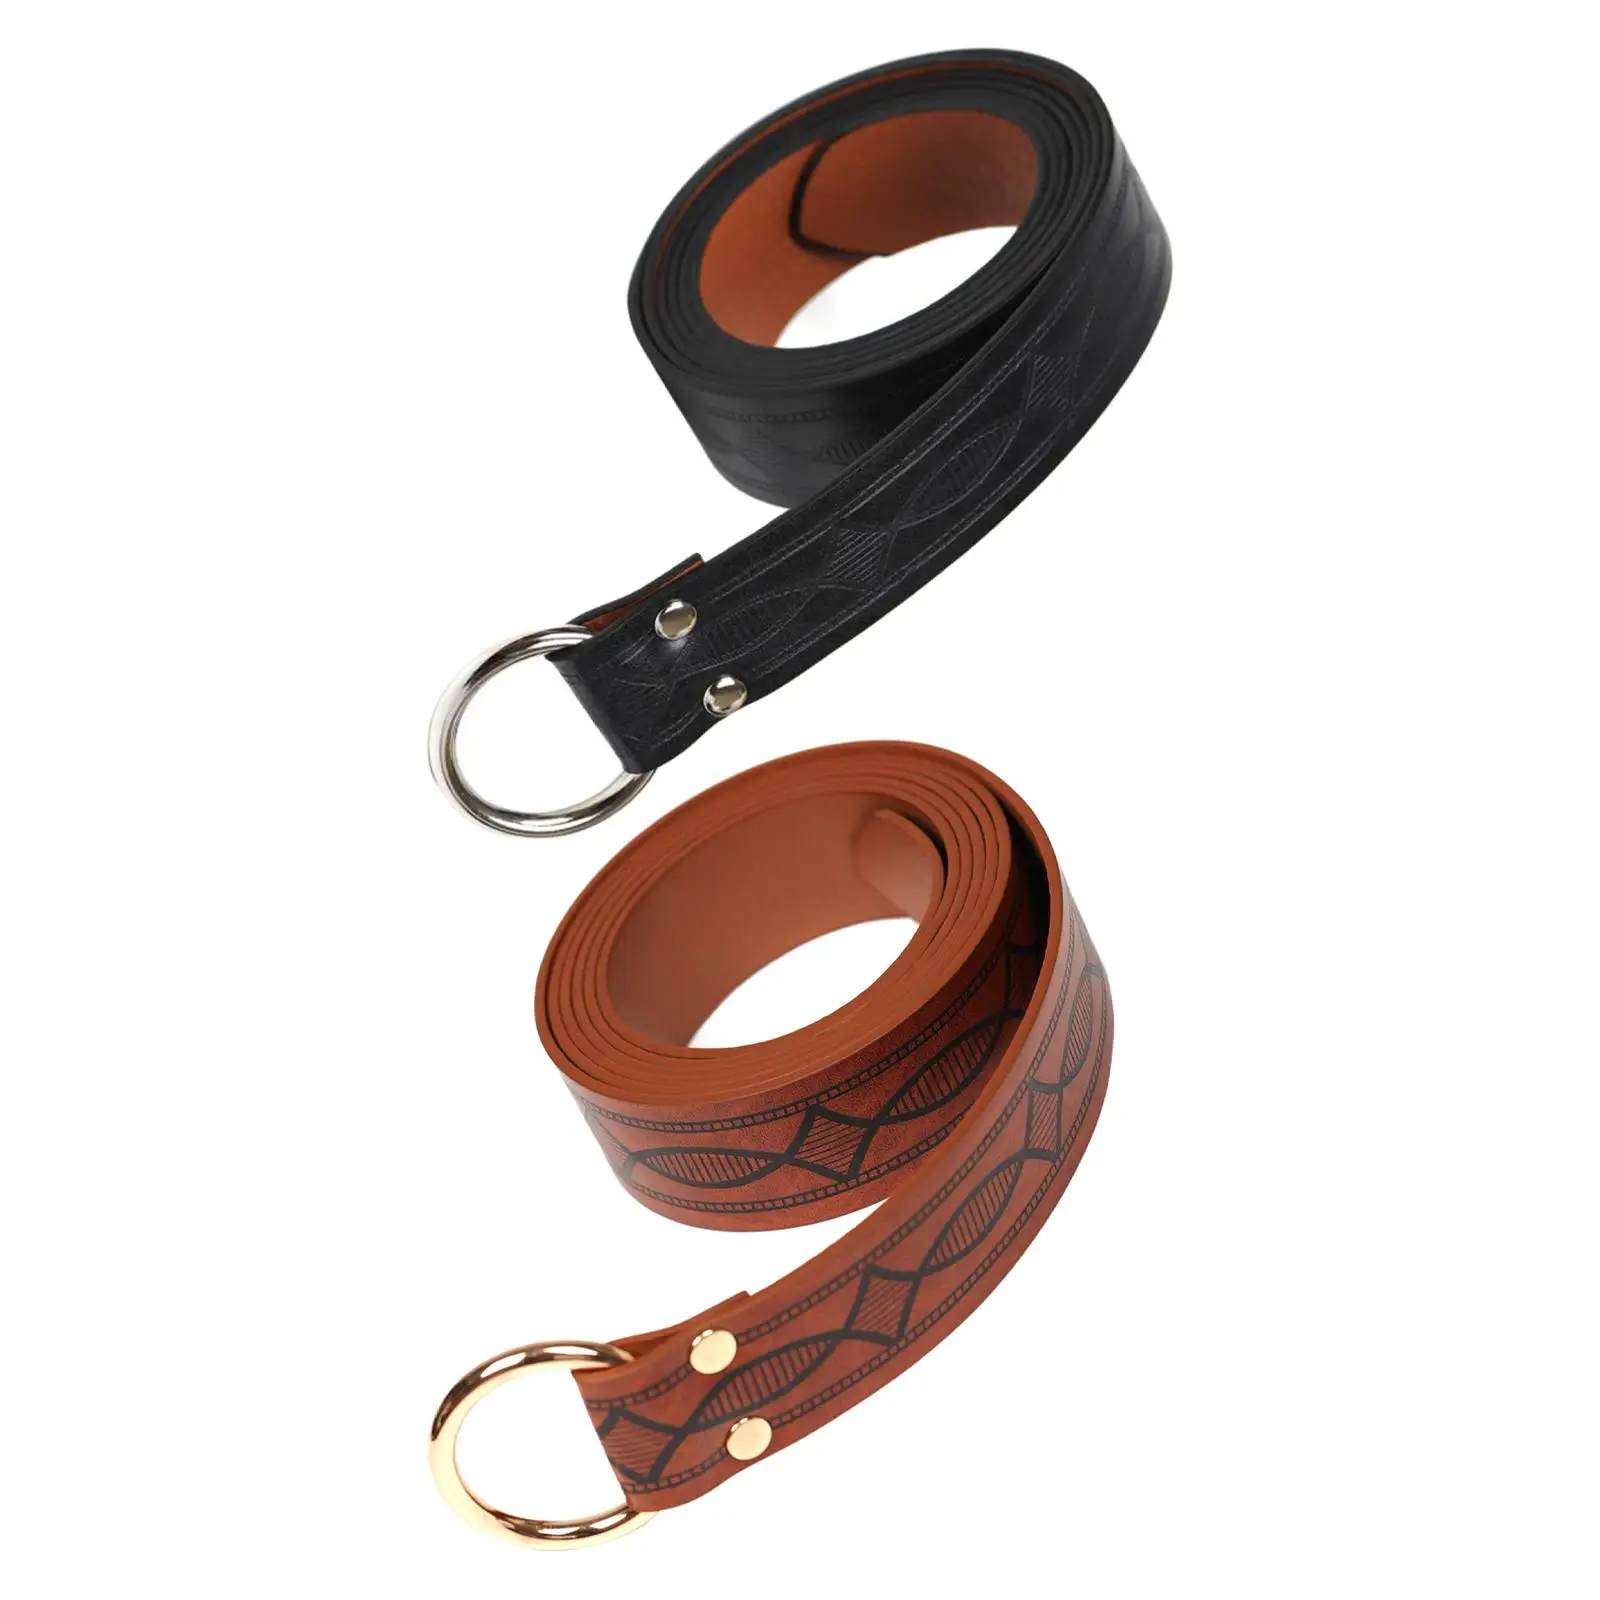 Medieval Knight Waist Belt Costume Accessories with Metals PU Leather Belt for Pants